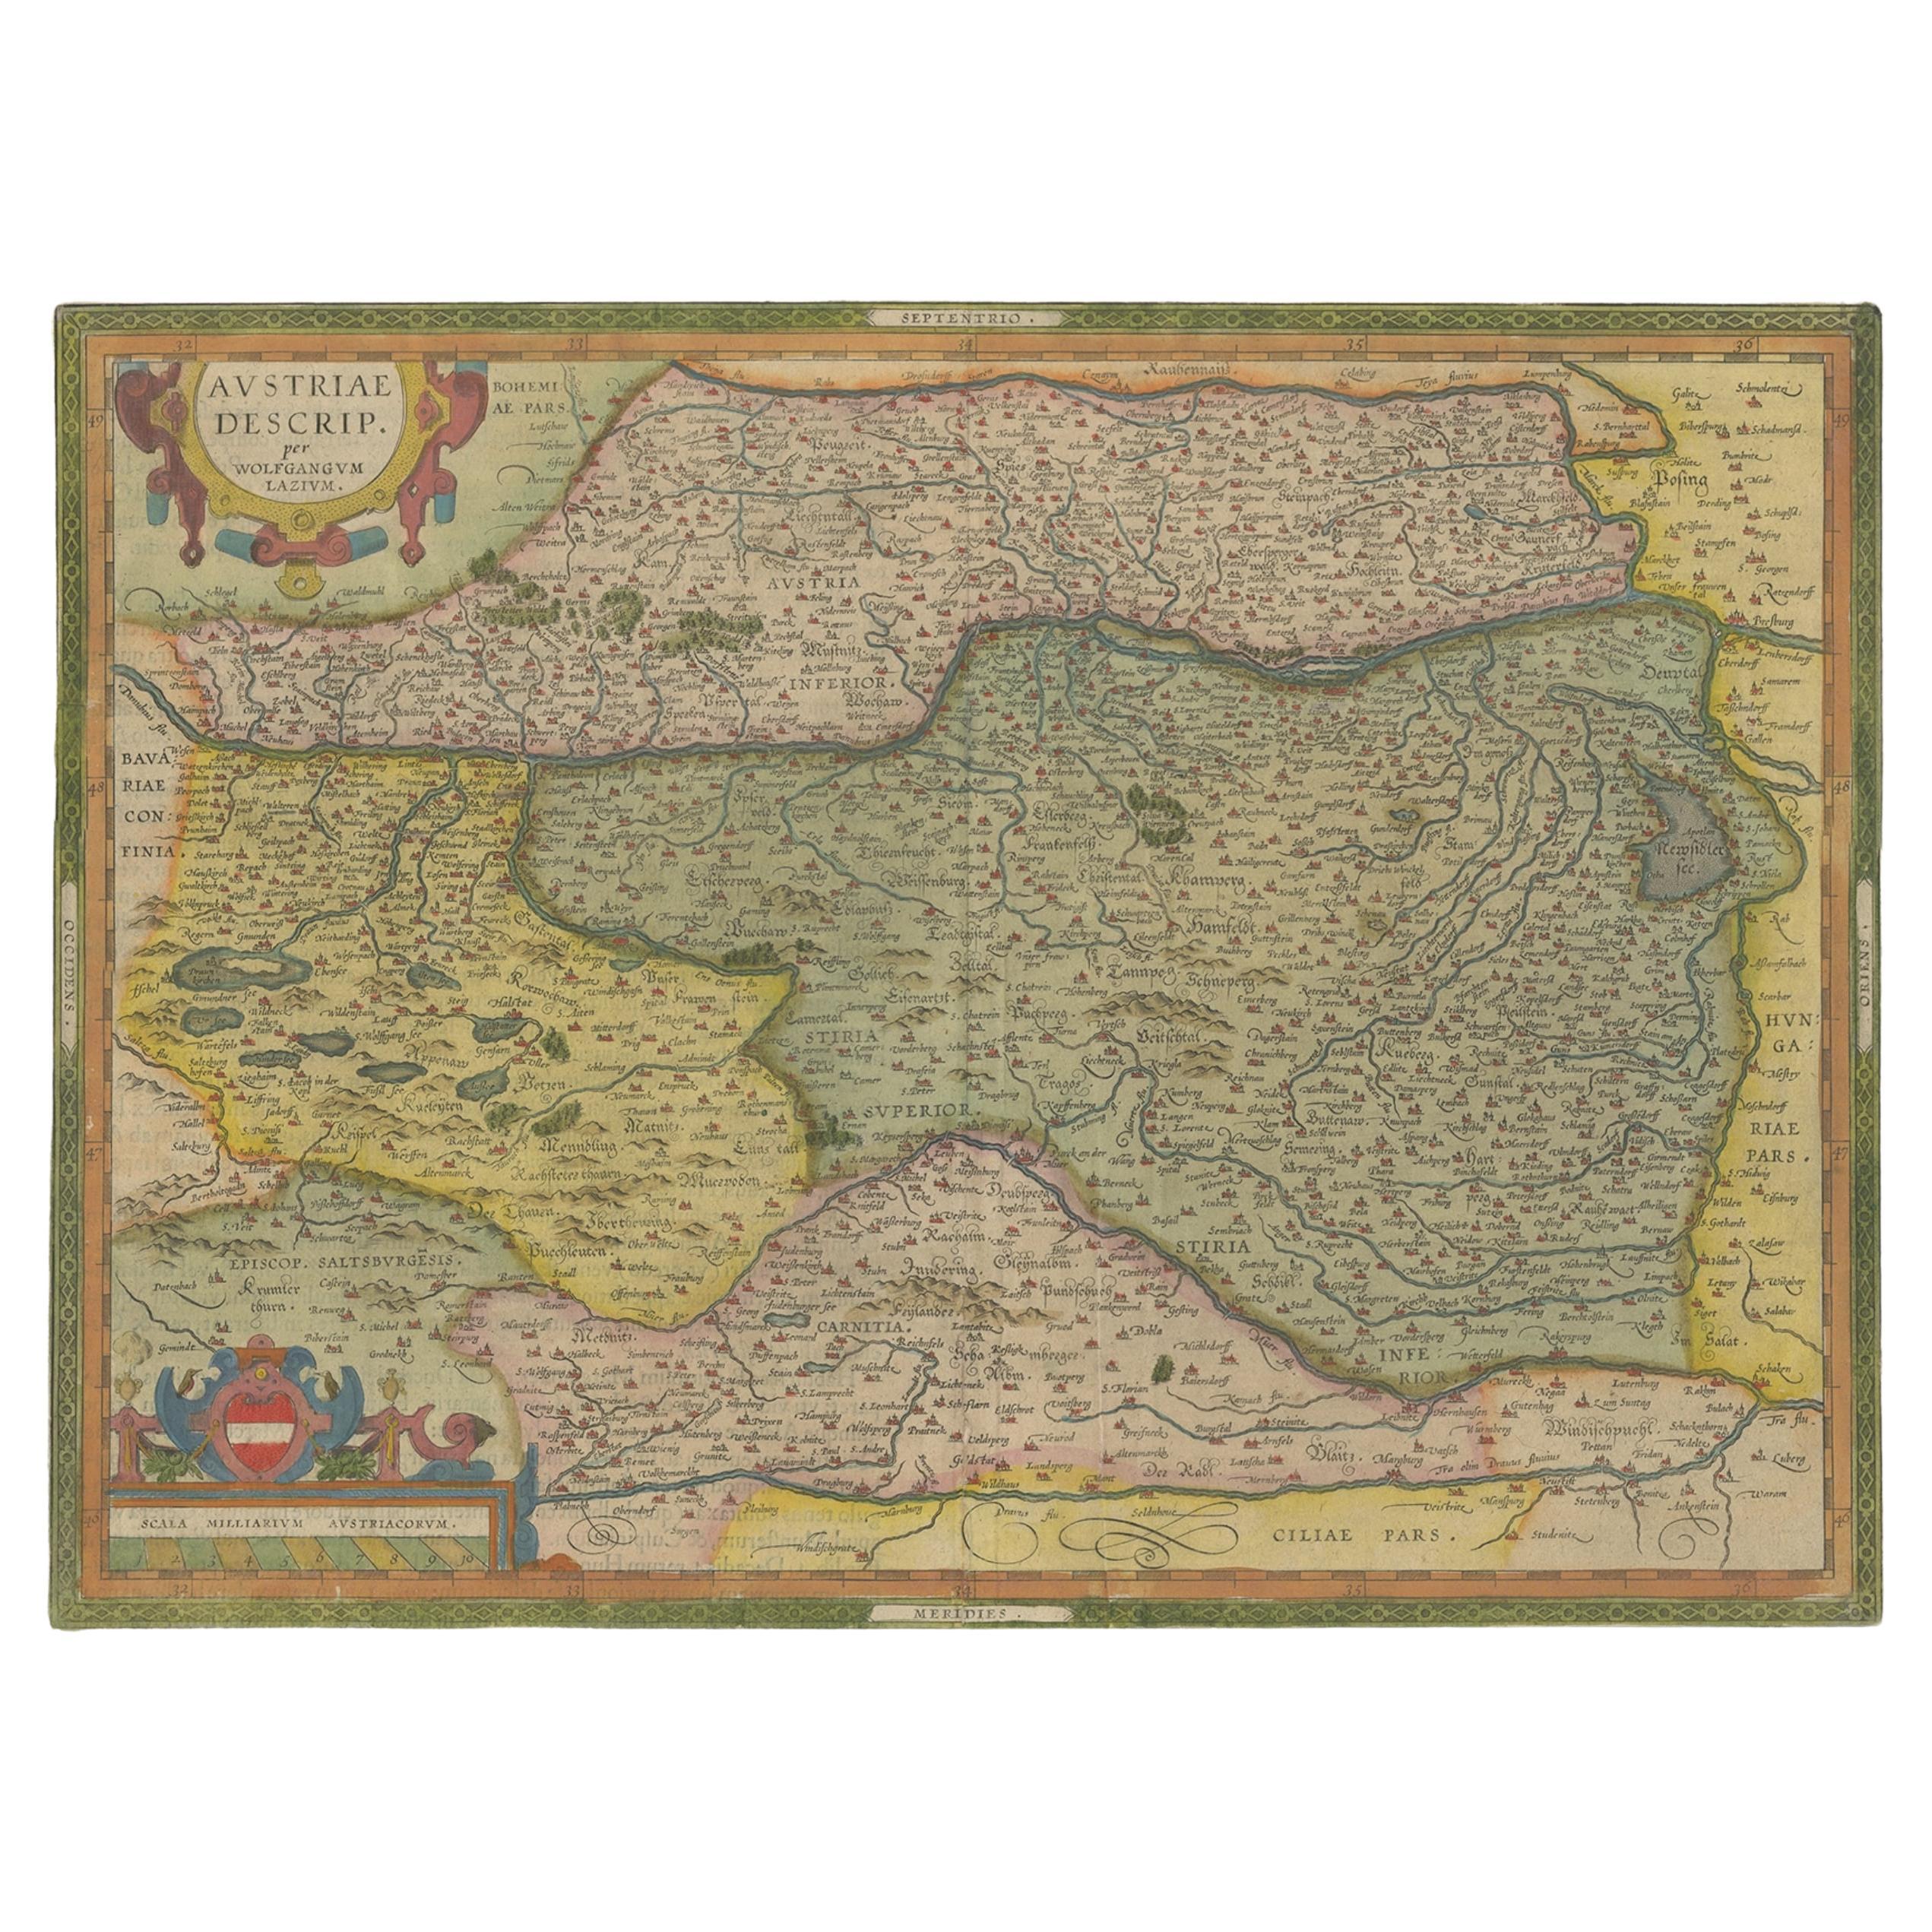 Antique map titled 'Austriae Descrip. per Wolfgangum Lazium' Original antique map of Austria. Published by A. Ortelius, circa 1612.

Artists and Engravers: Abraham Ortelius is perhaps the best known and most frequently collected of all